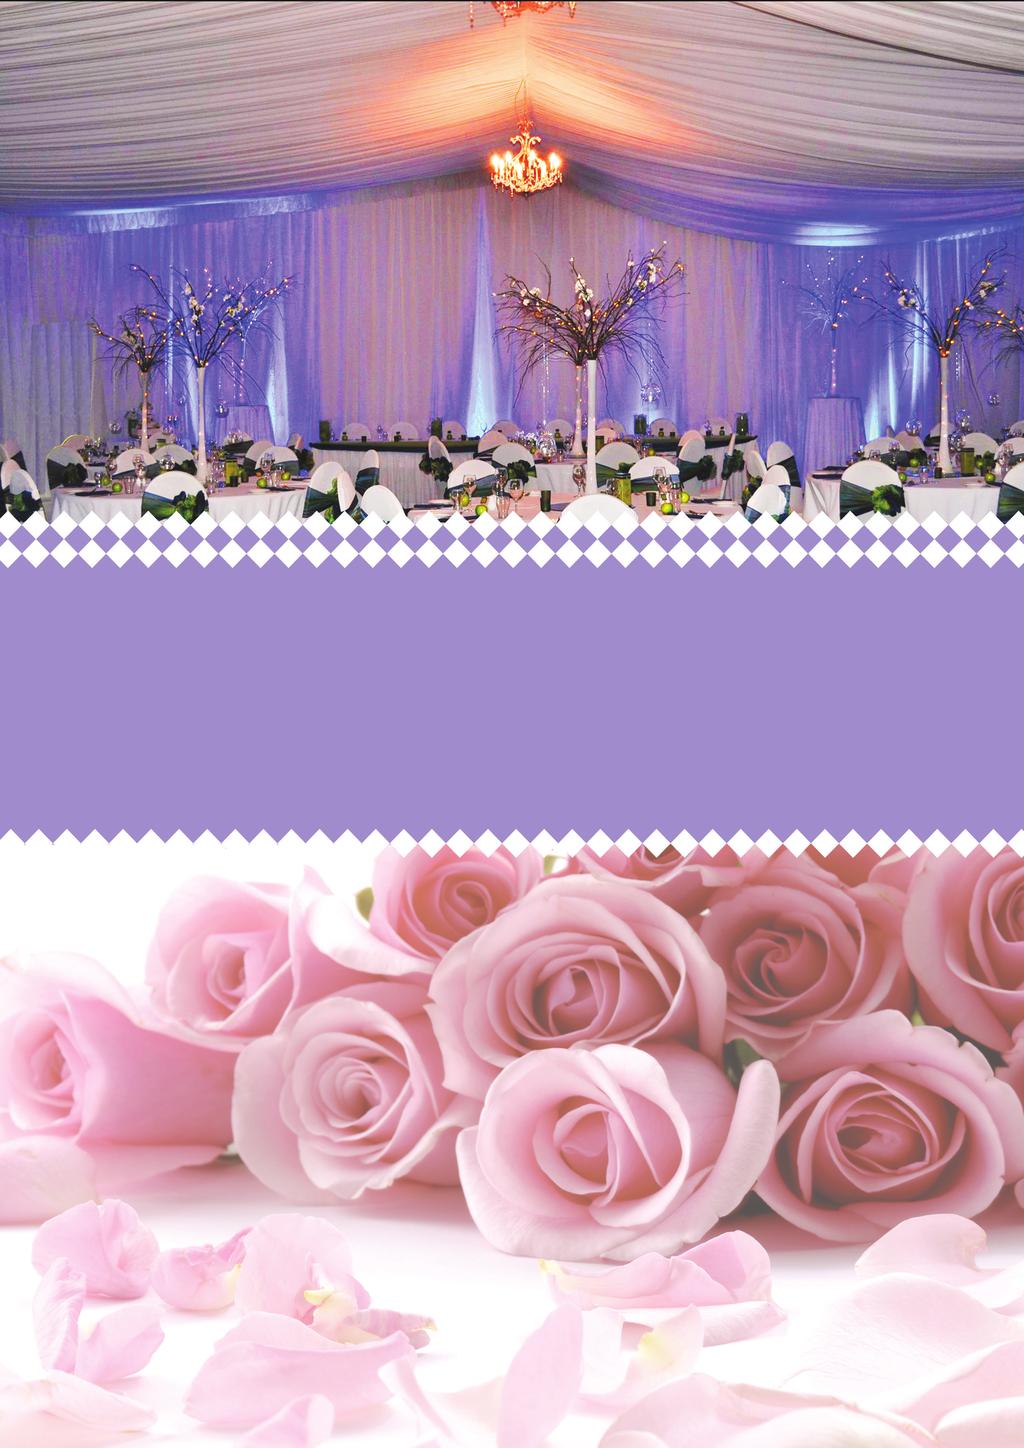 Weddings at the W ith over 50 years of experience, the Bathurst RSL knows exactly how to take care of your family and